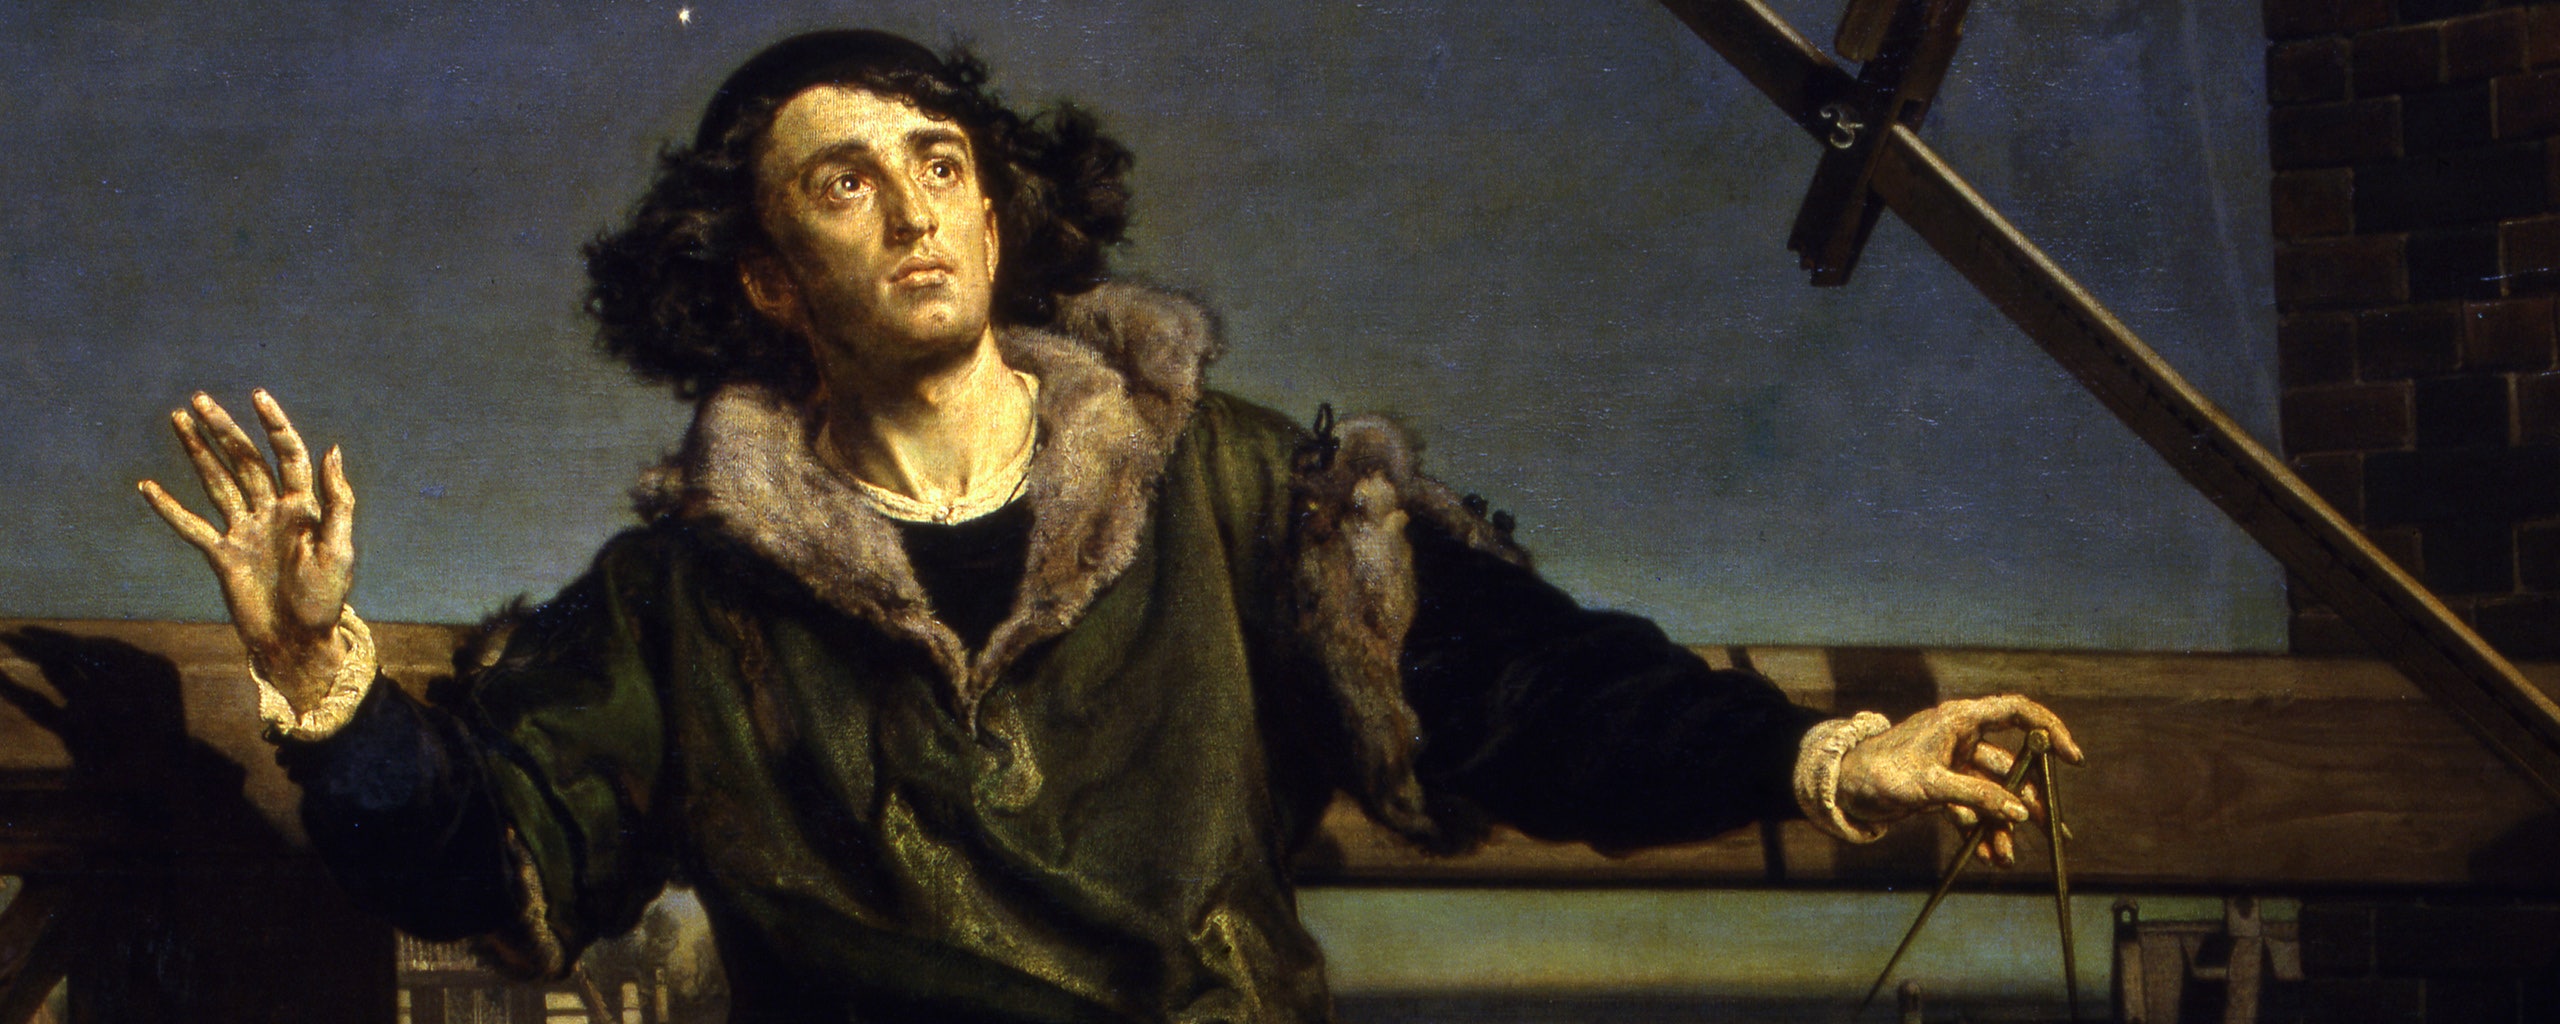 Nicolaus Copernicus: The man who stopped the sun and moved the Earth